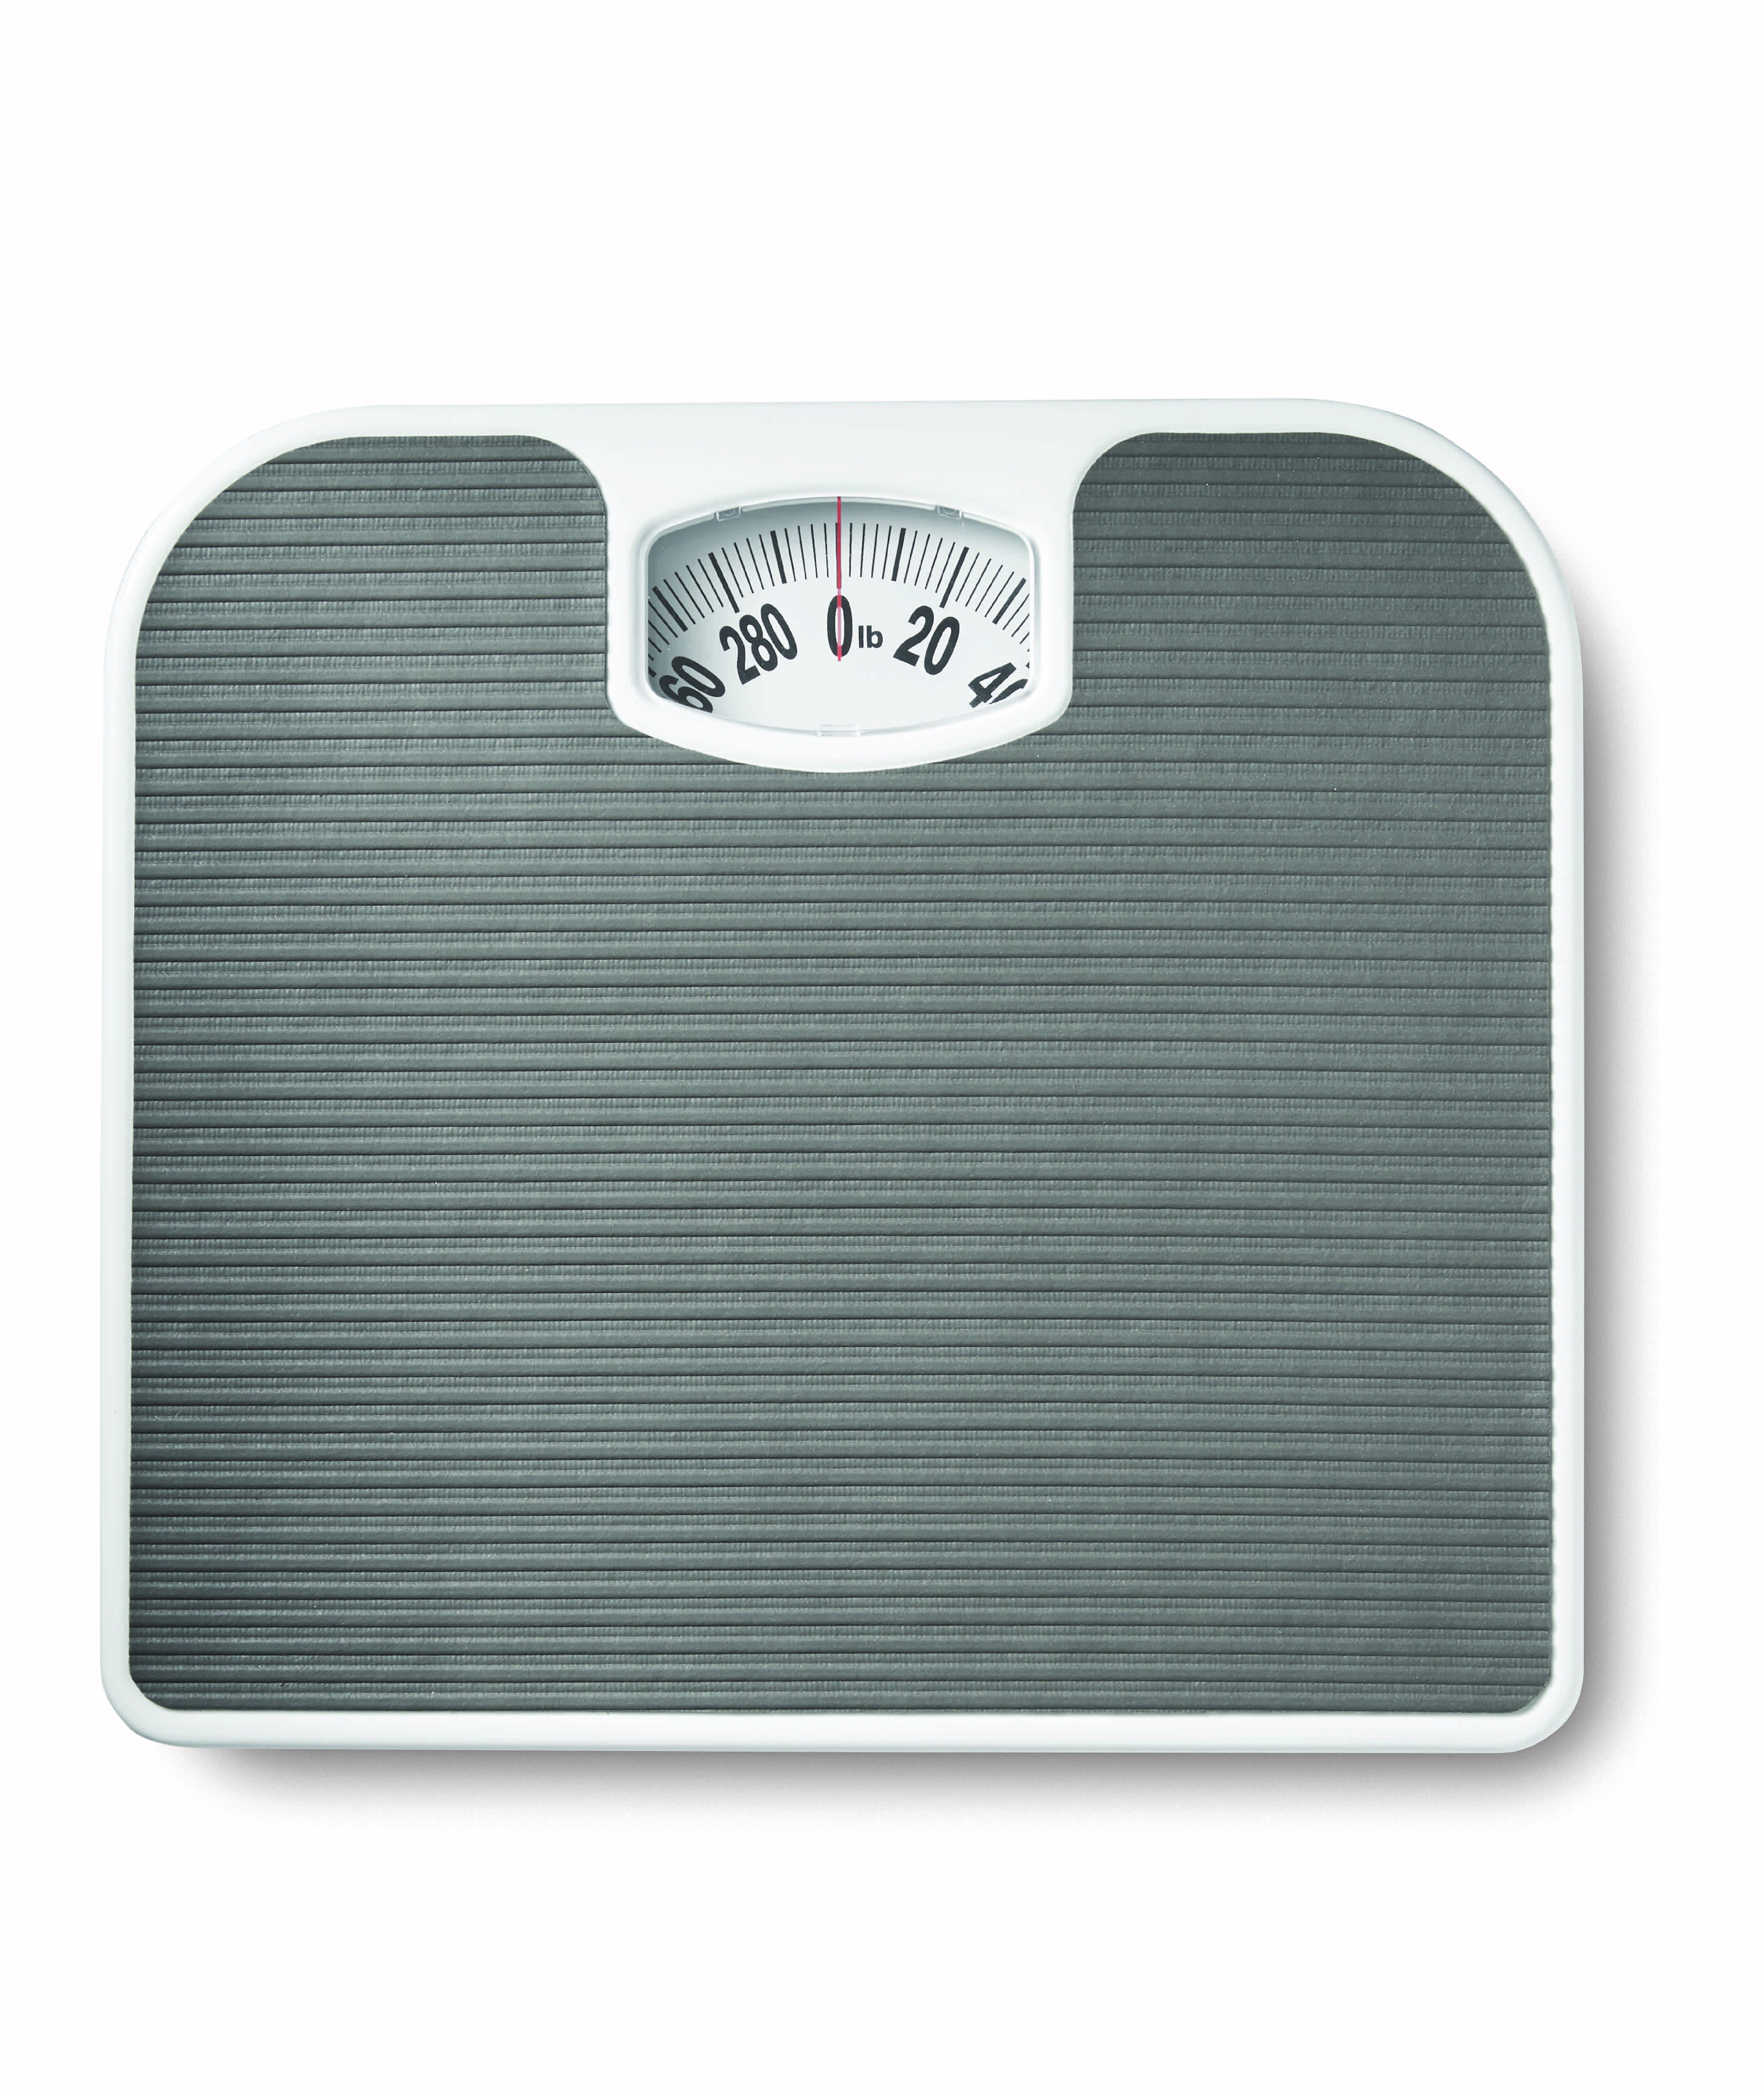 Stainless Steel Mechanical Scales Bathroom Scales Professional Extra-Large Analog Mechanical Dial Precision Scale For Gyms Homes Bathrooms 